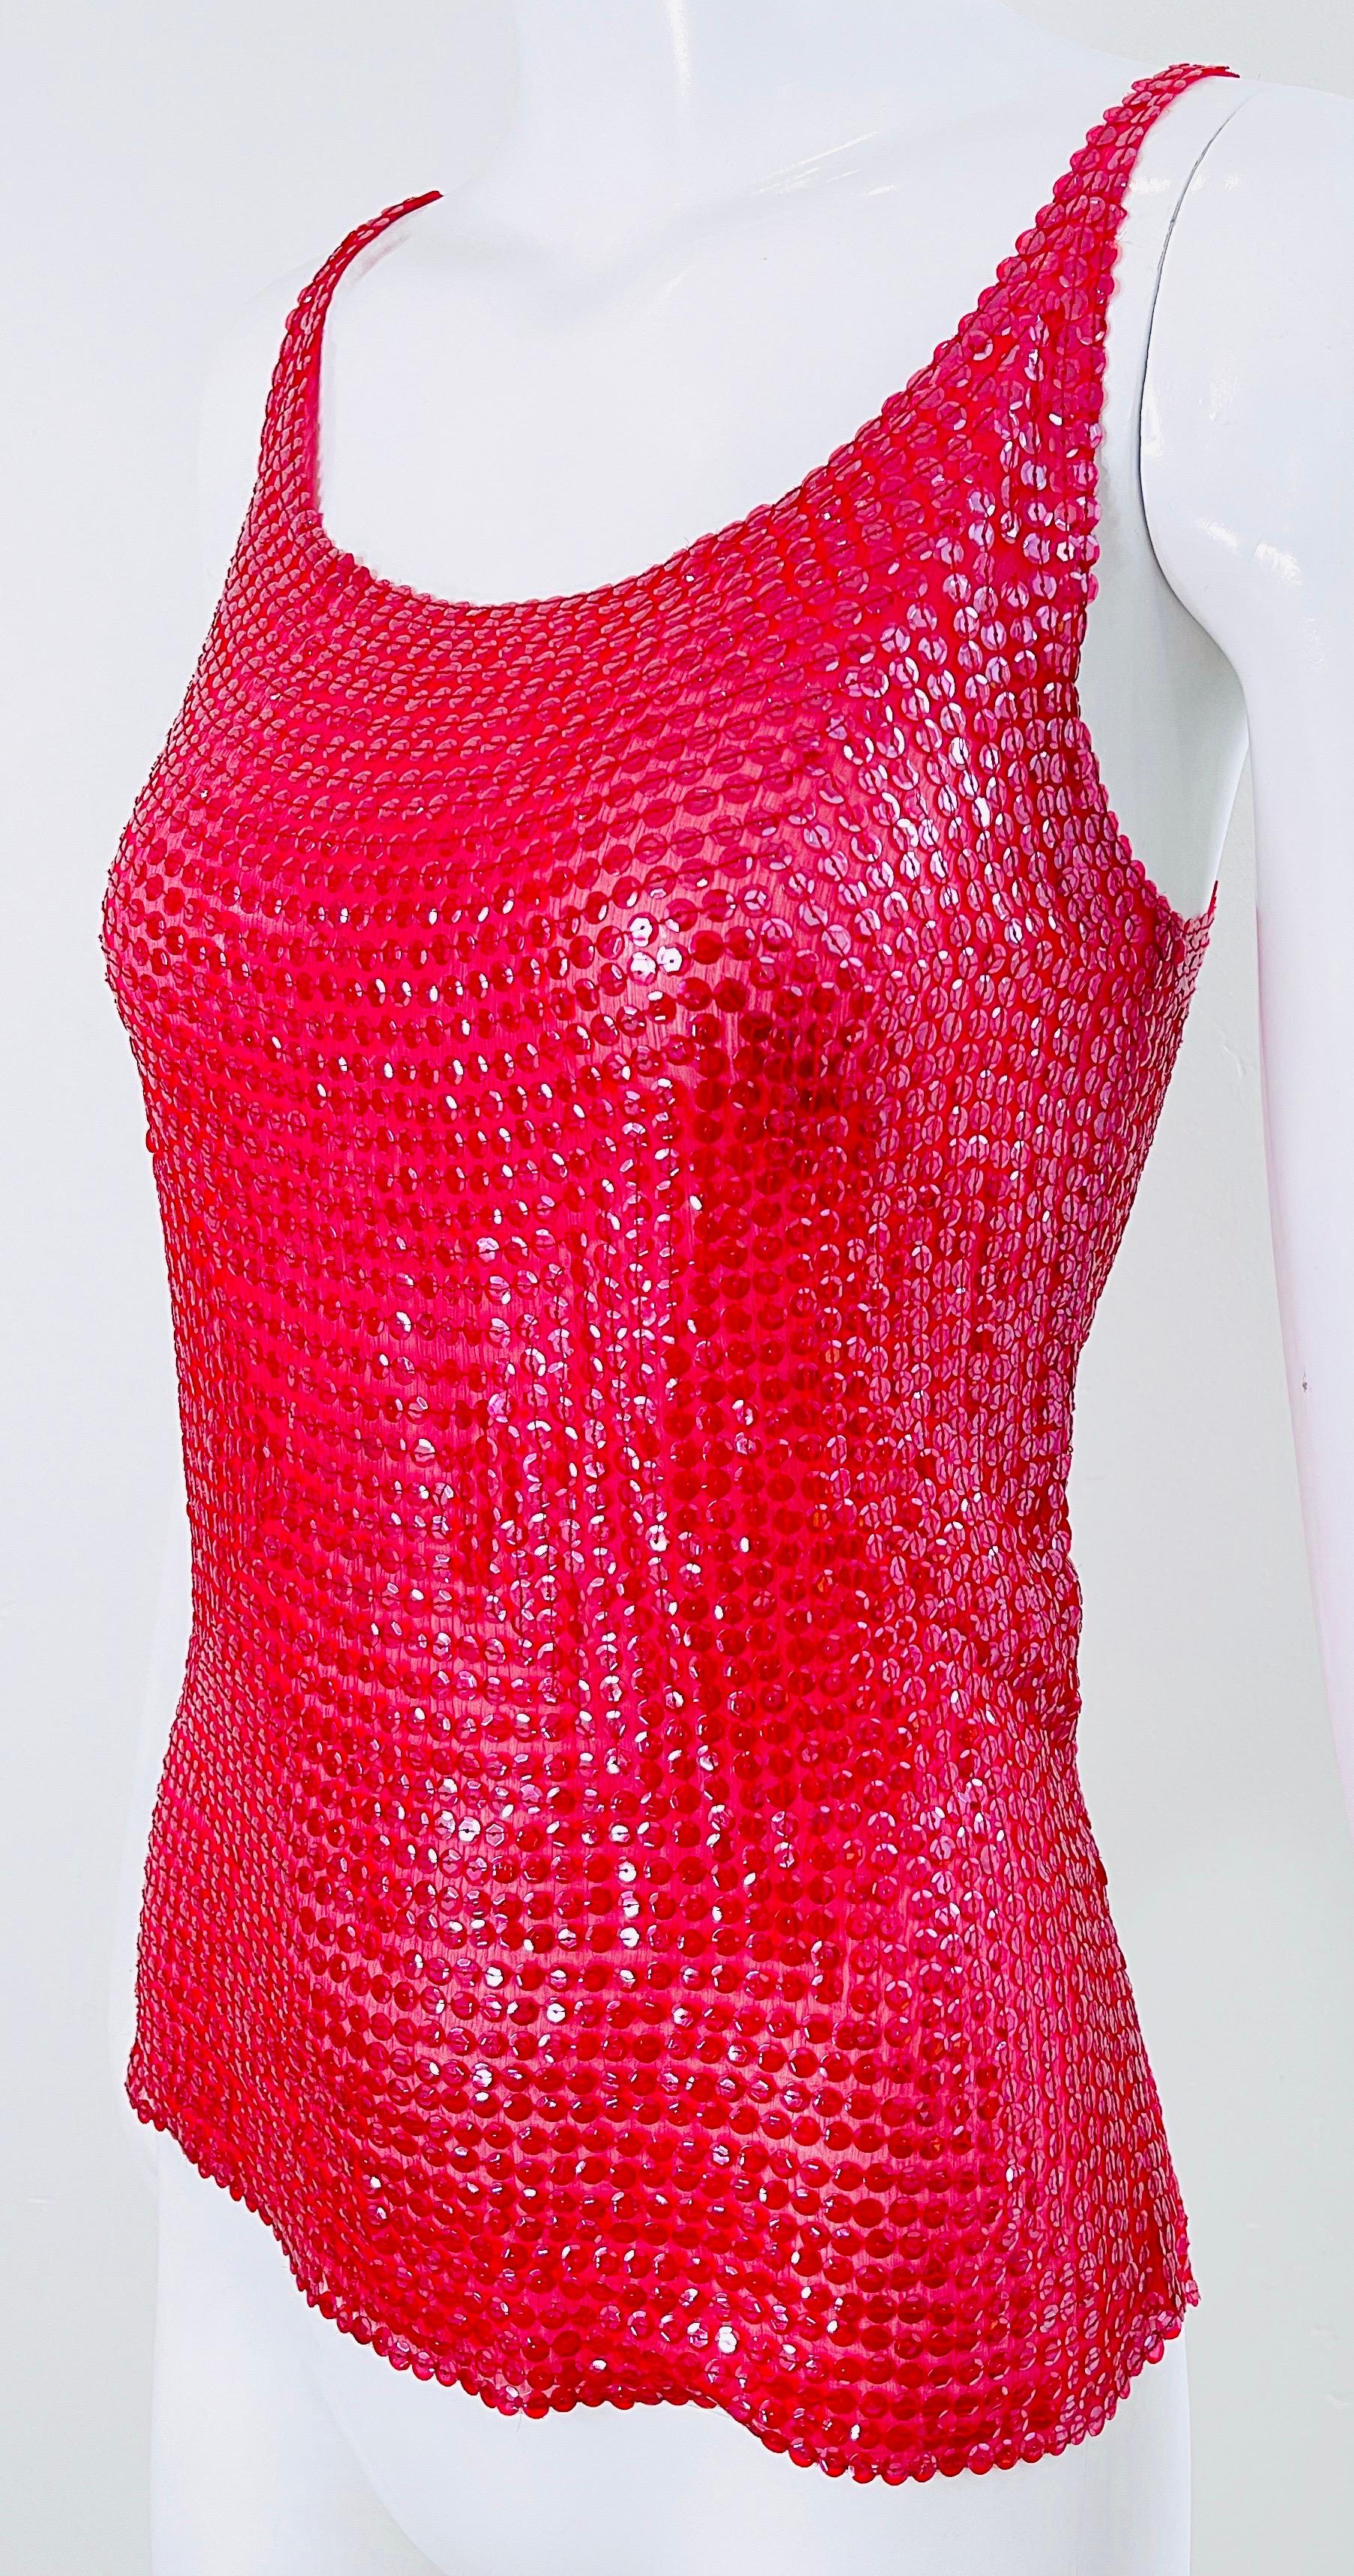 Halston 1970s Lipstick Red Silk Chiffon Fully Sequin Vintage 70s Sleeveless Top For Sale 3